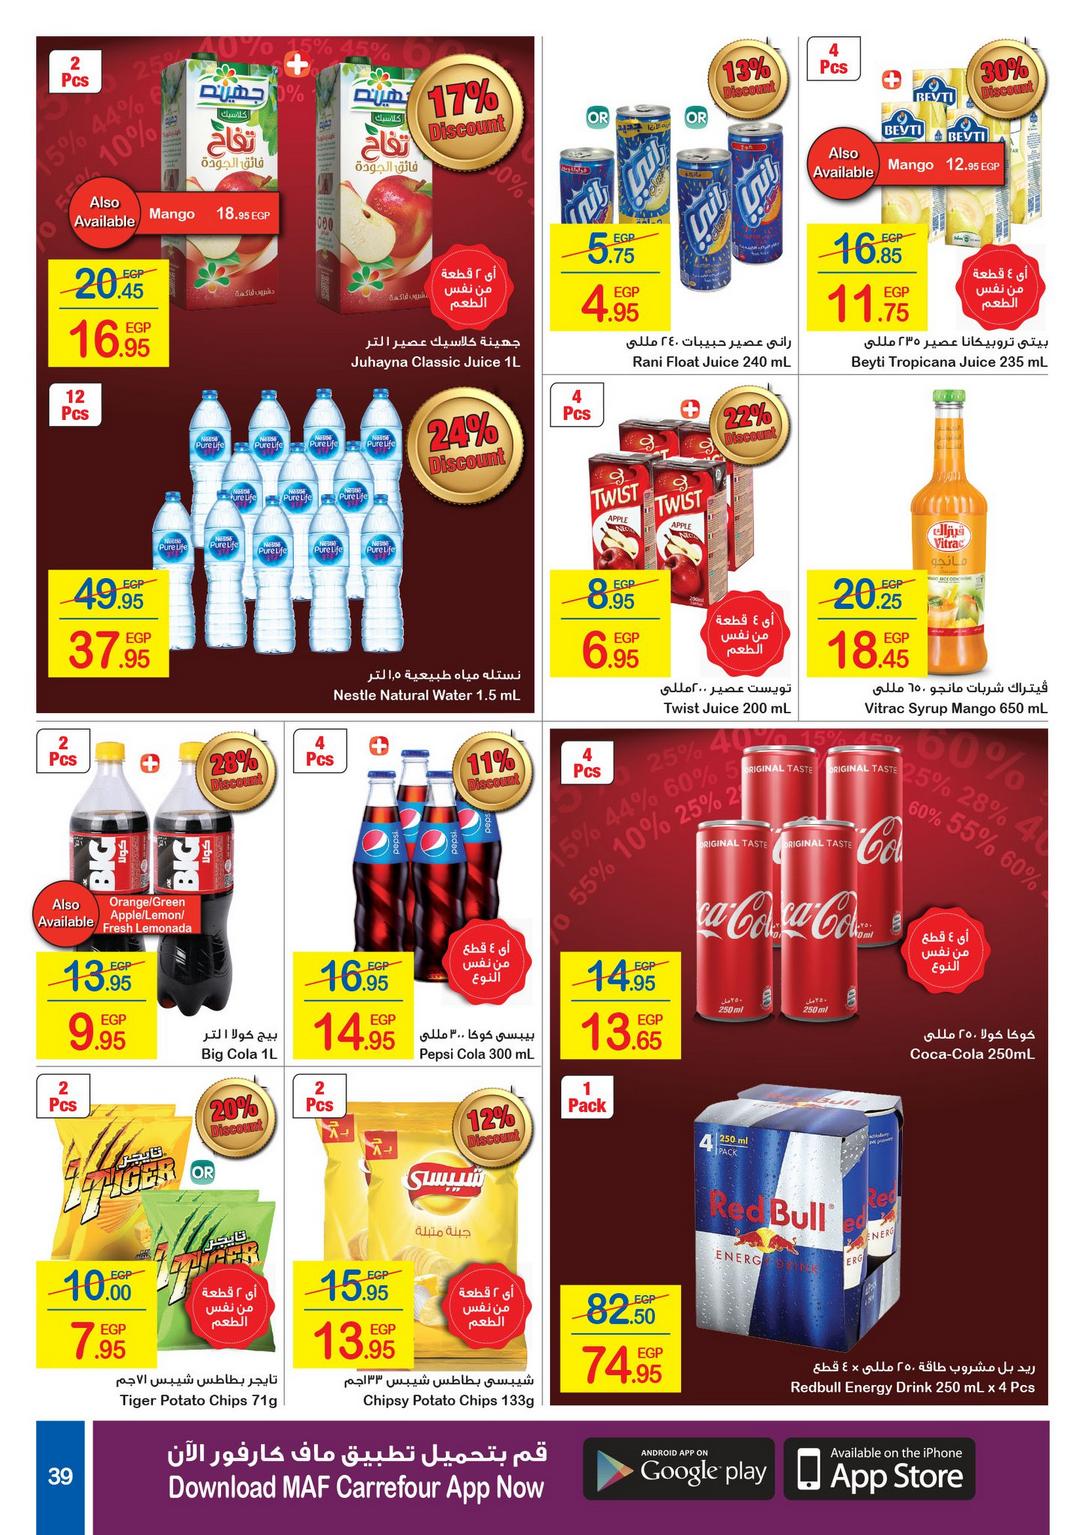 Carrefour Deals from 1/1 till 14/1 | Carrefour Egypt 40